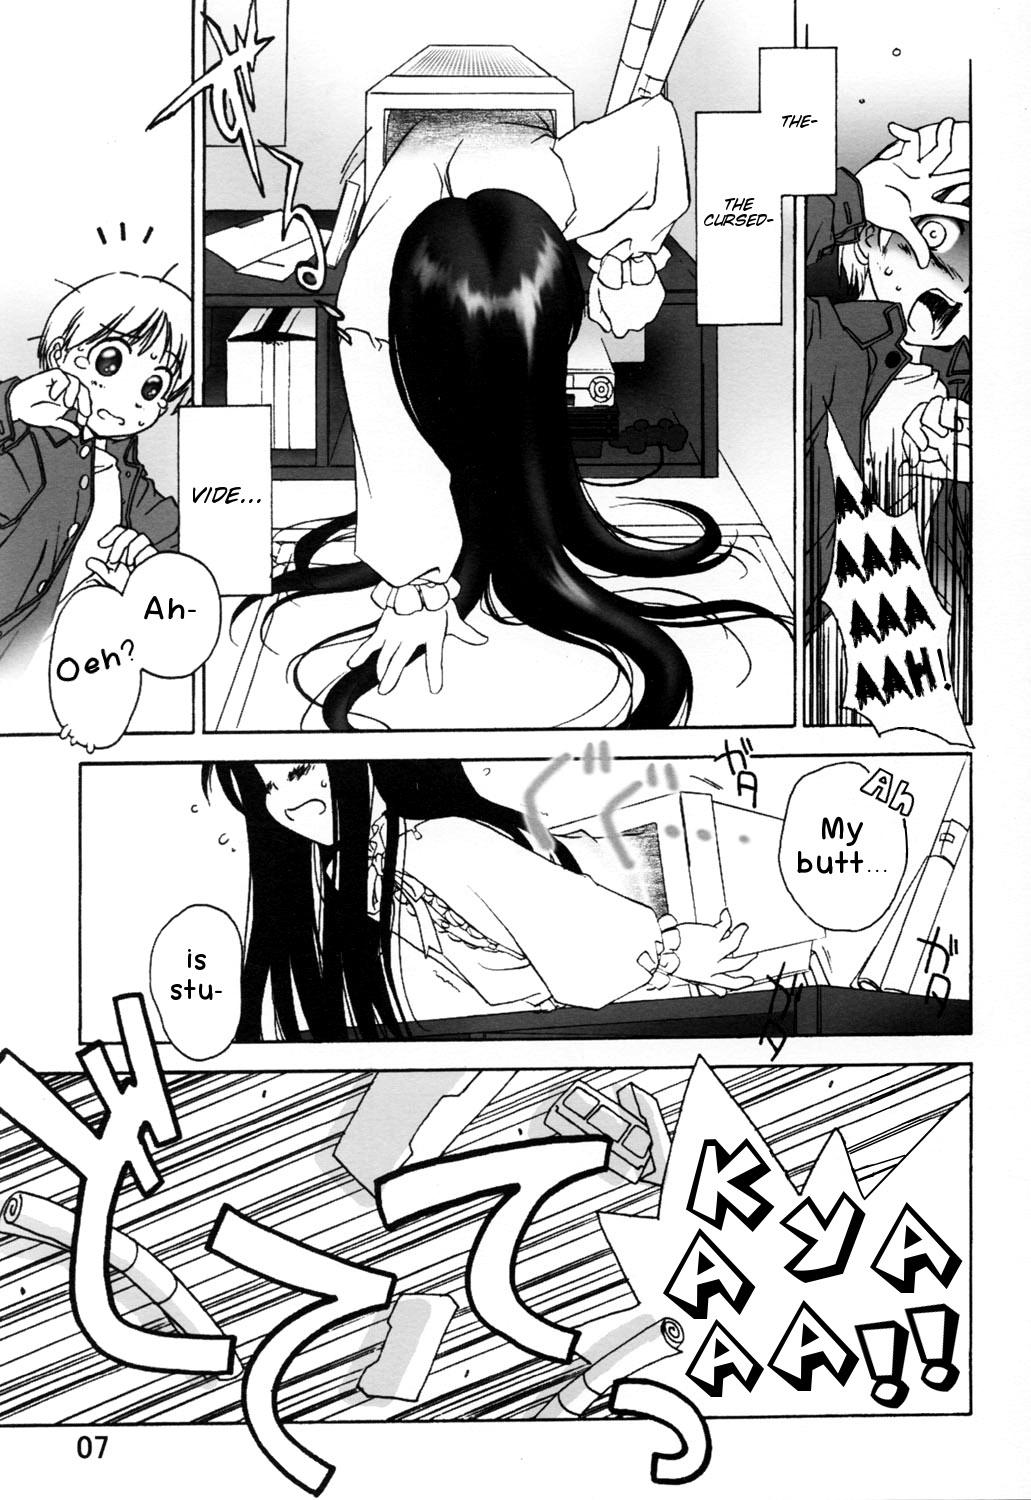 Transvestite Noroi no Video 1 - The ring Rope - Page 9